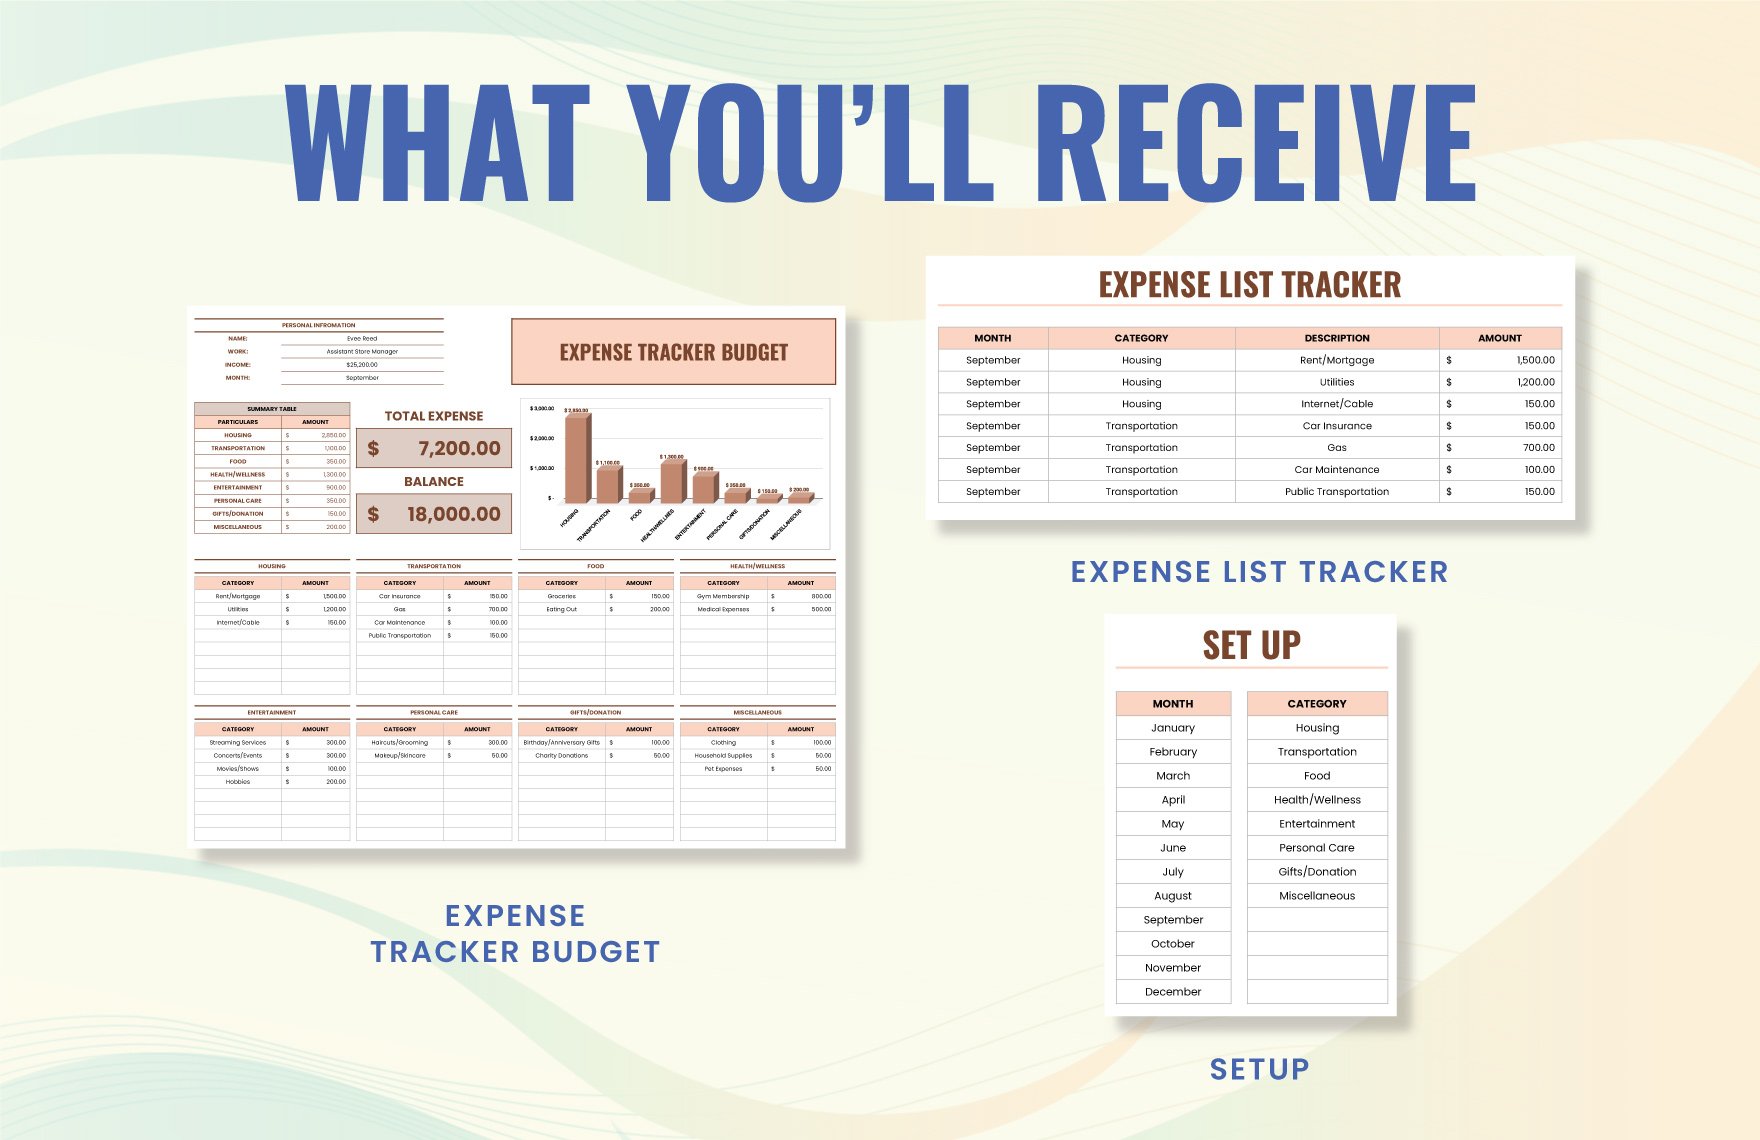 Expense Tracker Budget Template